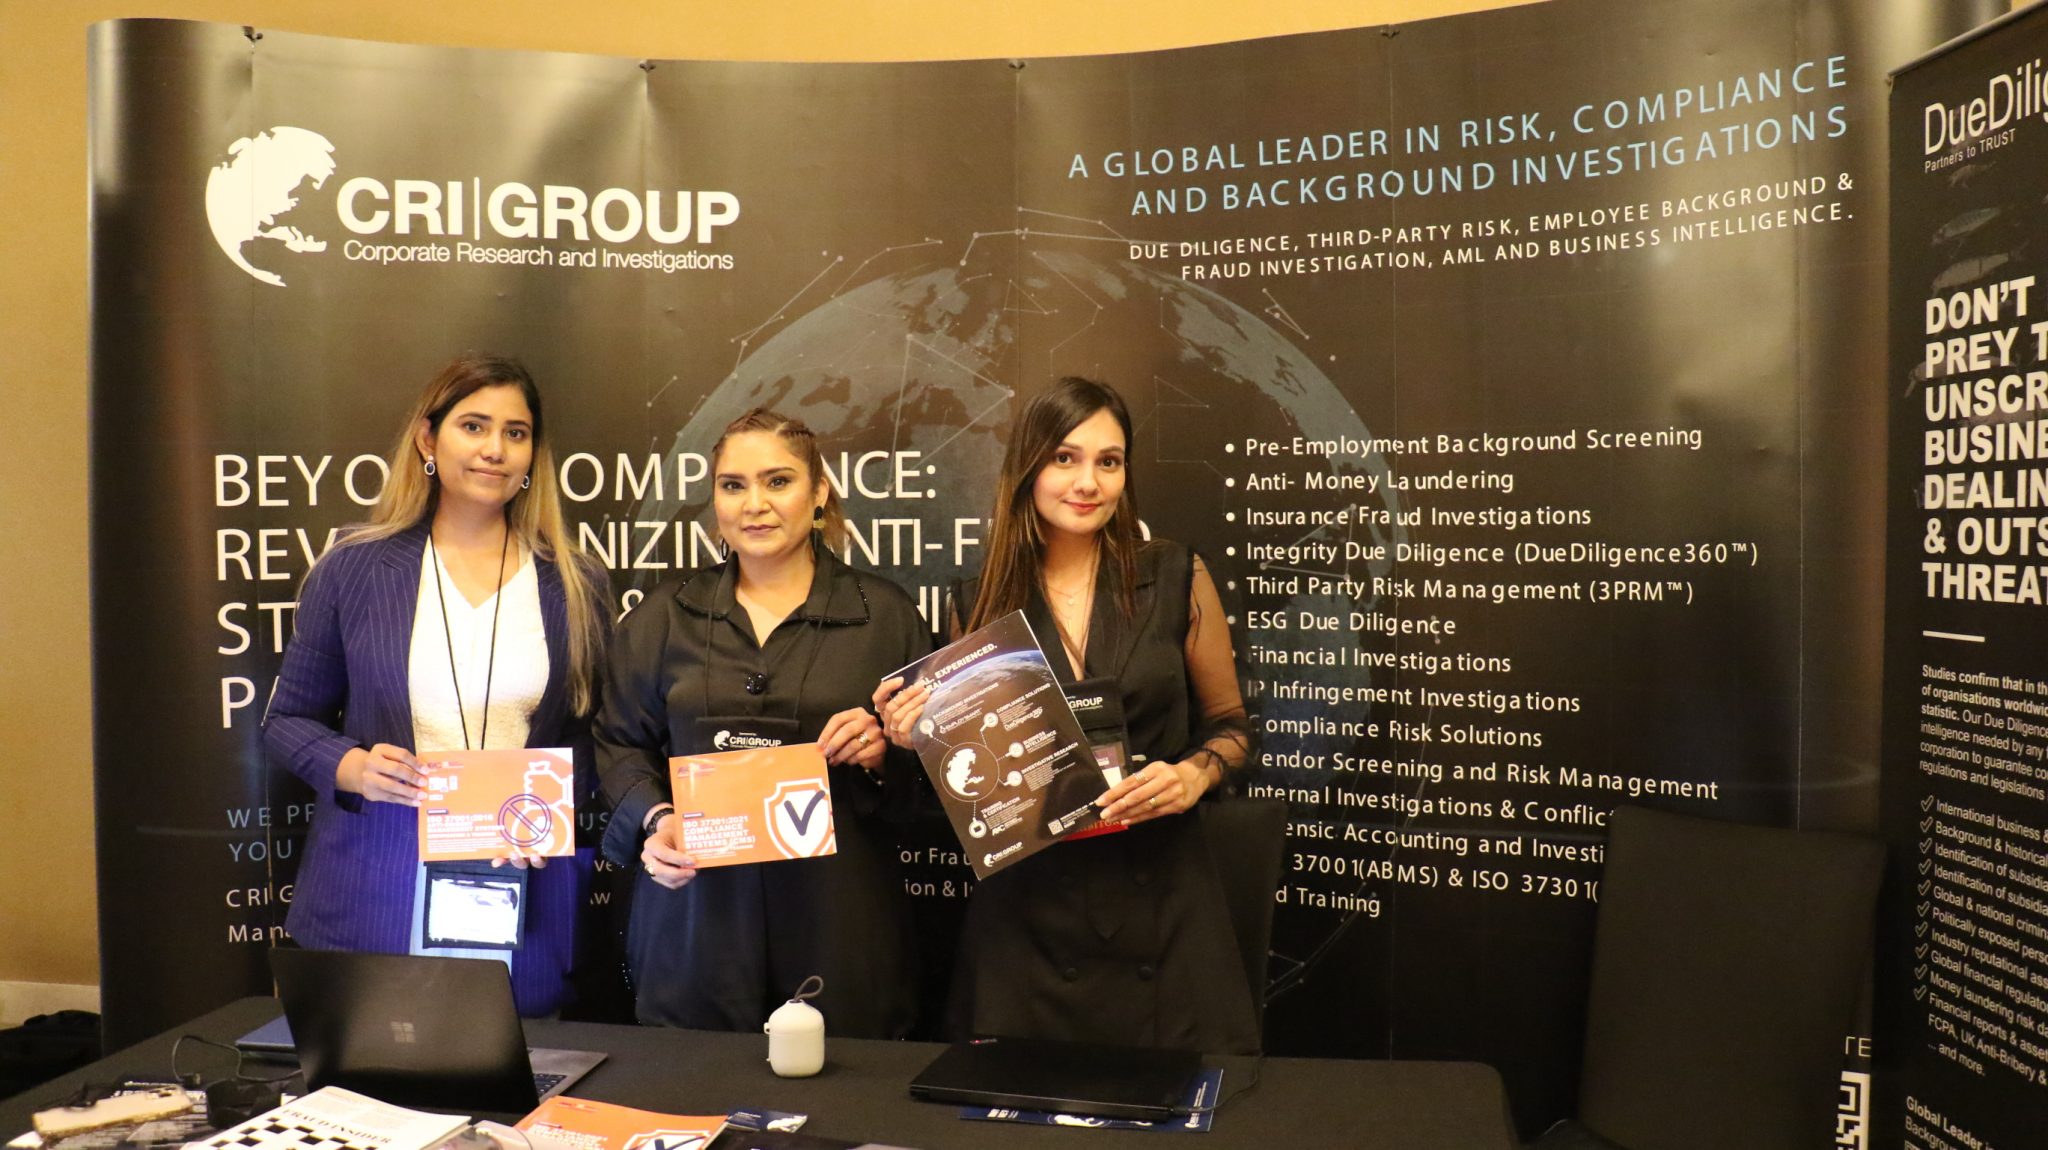 ACFE Fraud Conference Middle East 2023 - Image 8 - CRI Group